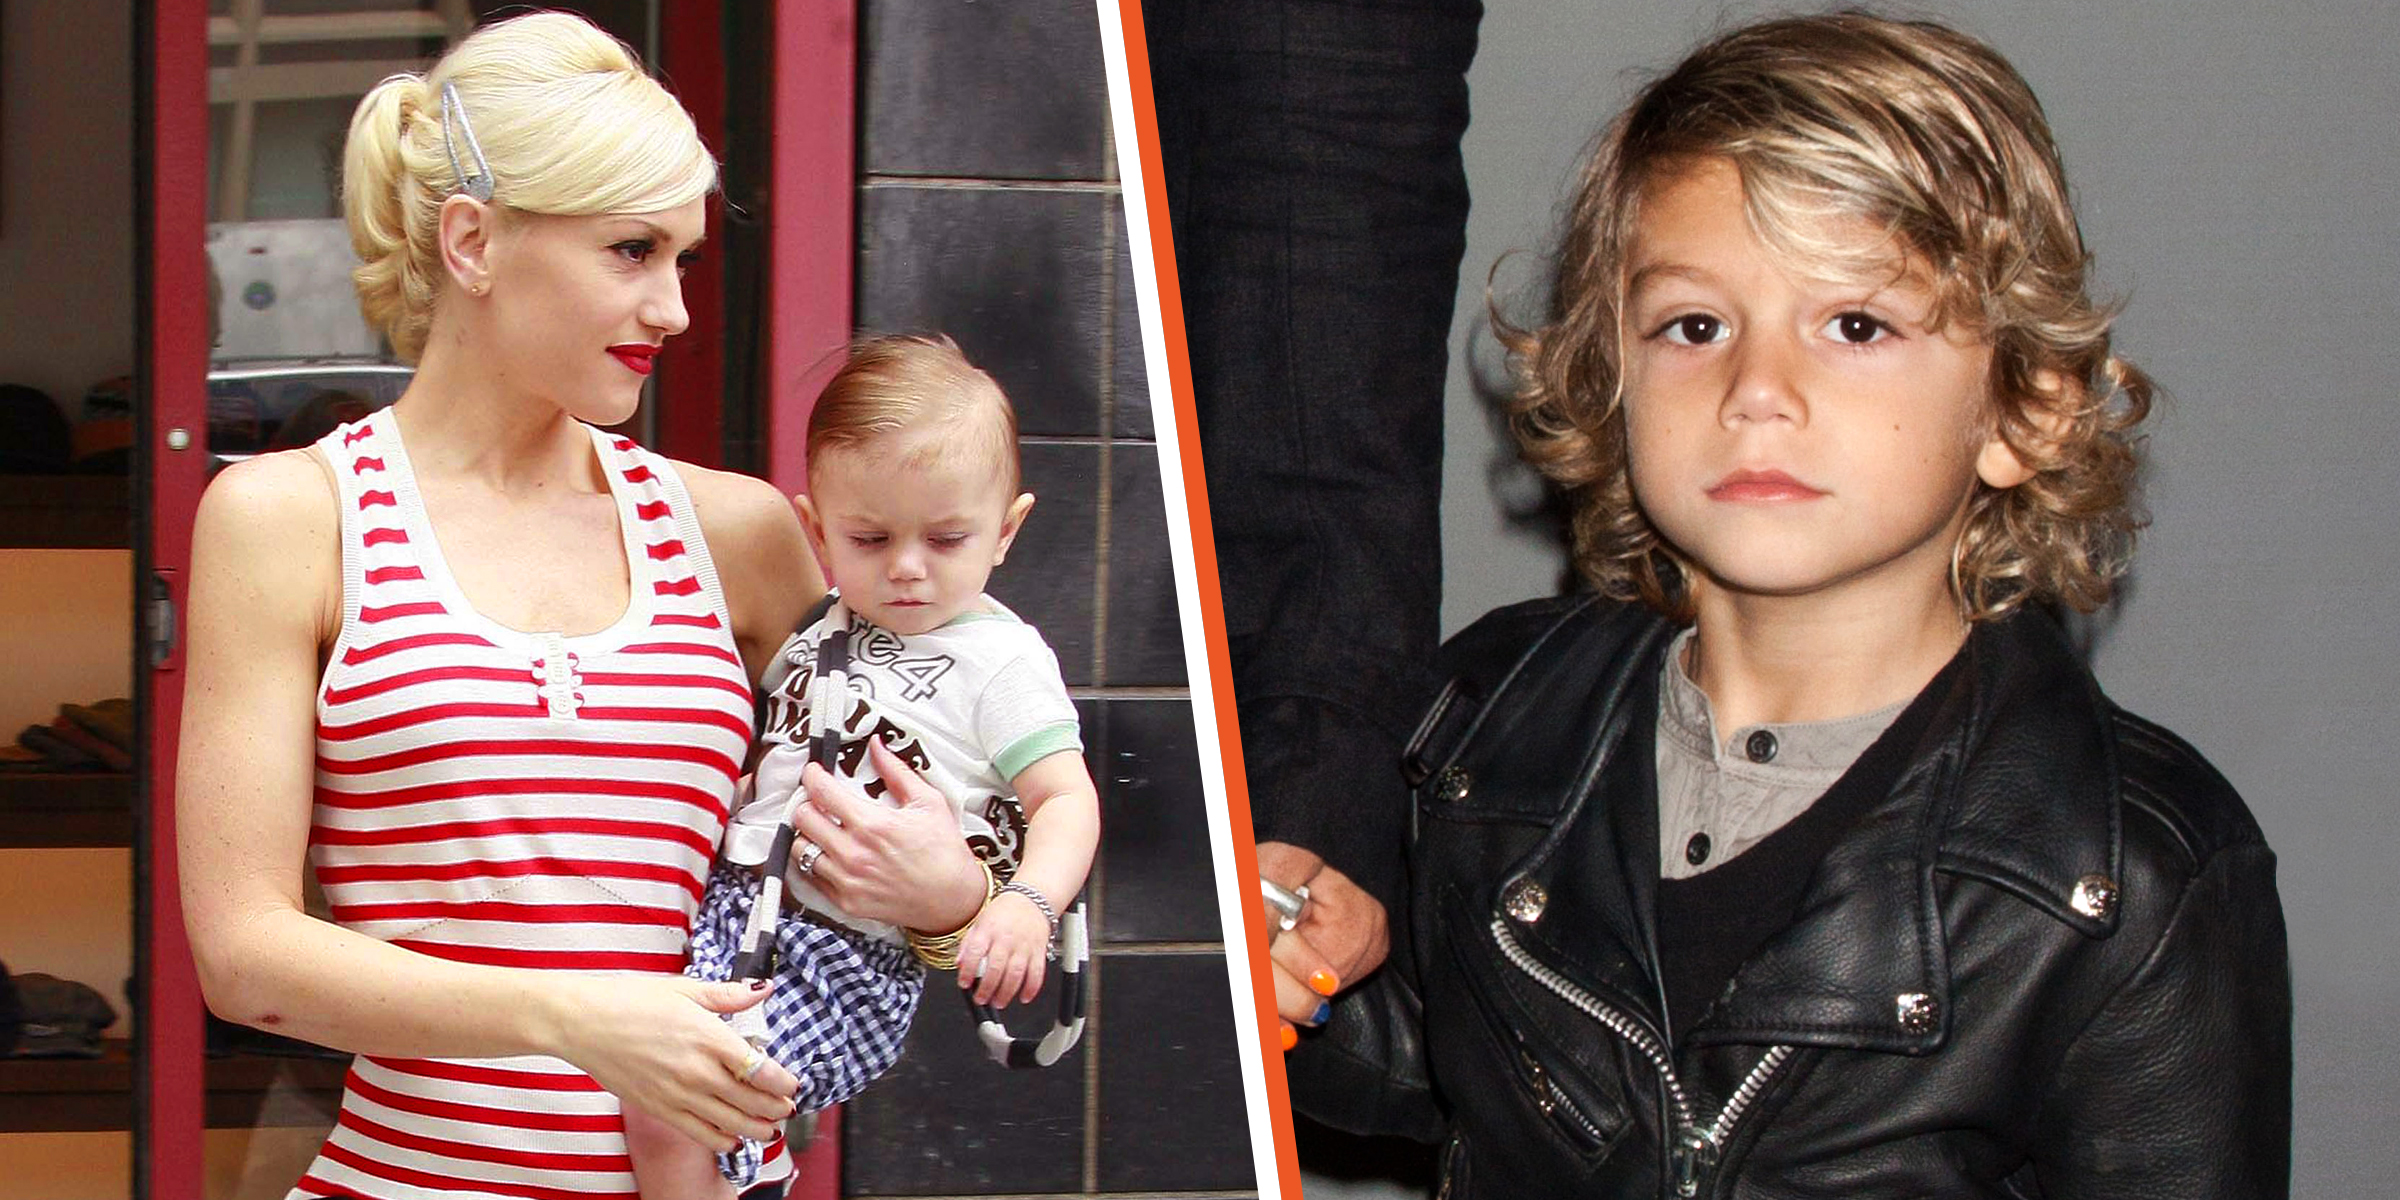 Gwen Stefani and son Kingston Rossdale, 2007 | Kingston Rossdale, 2010 | Source: Getty Images